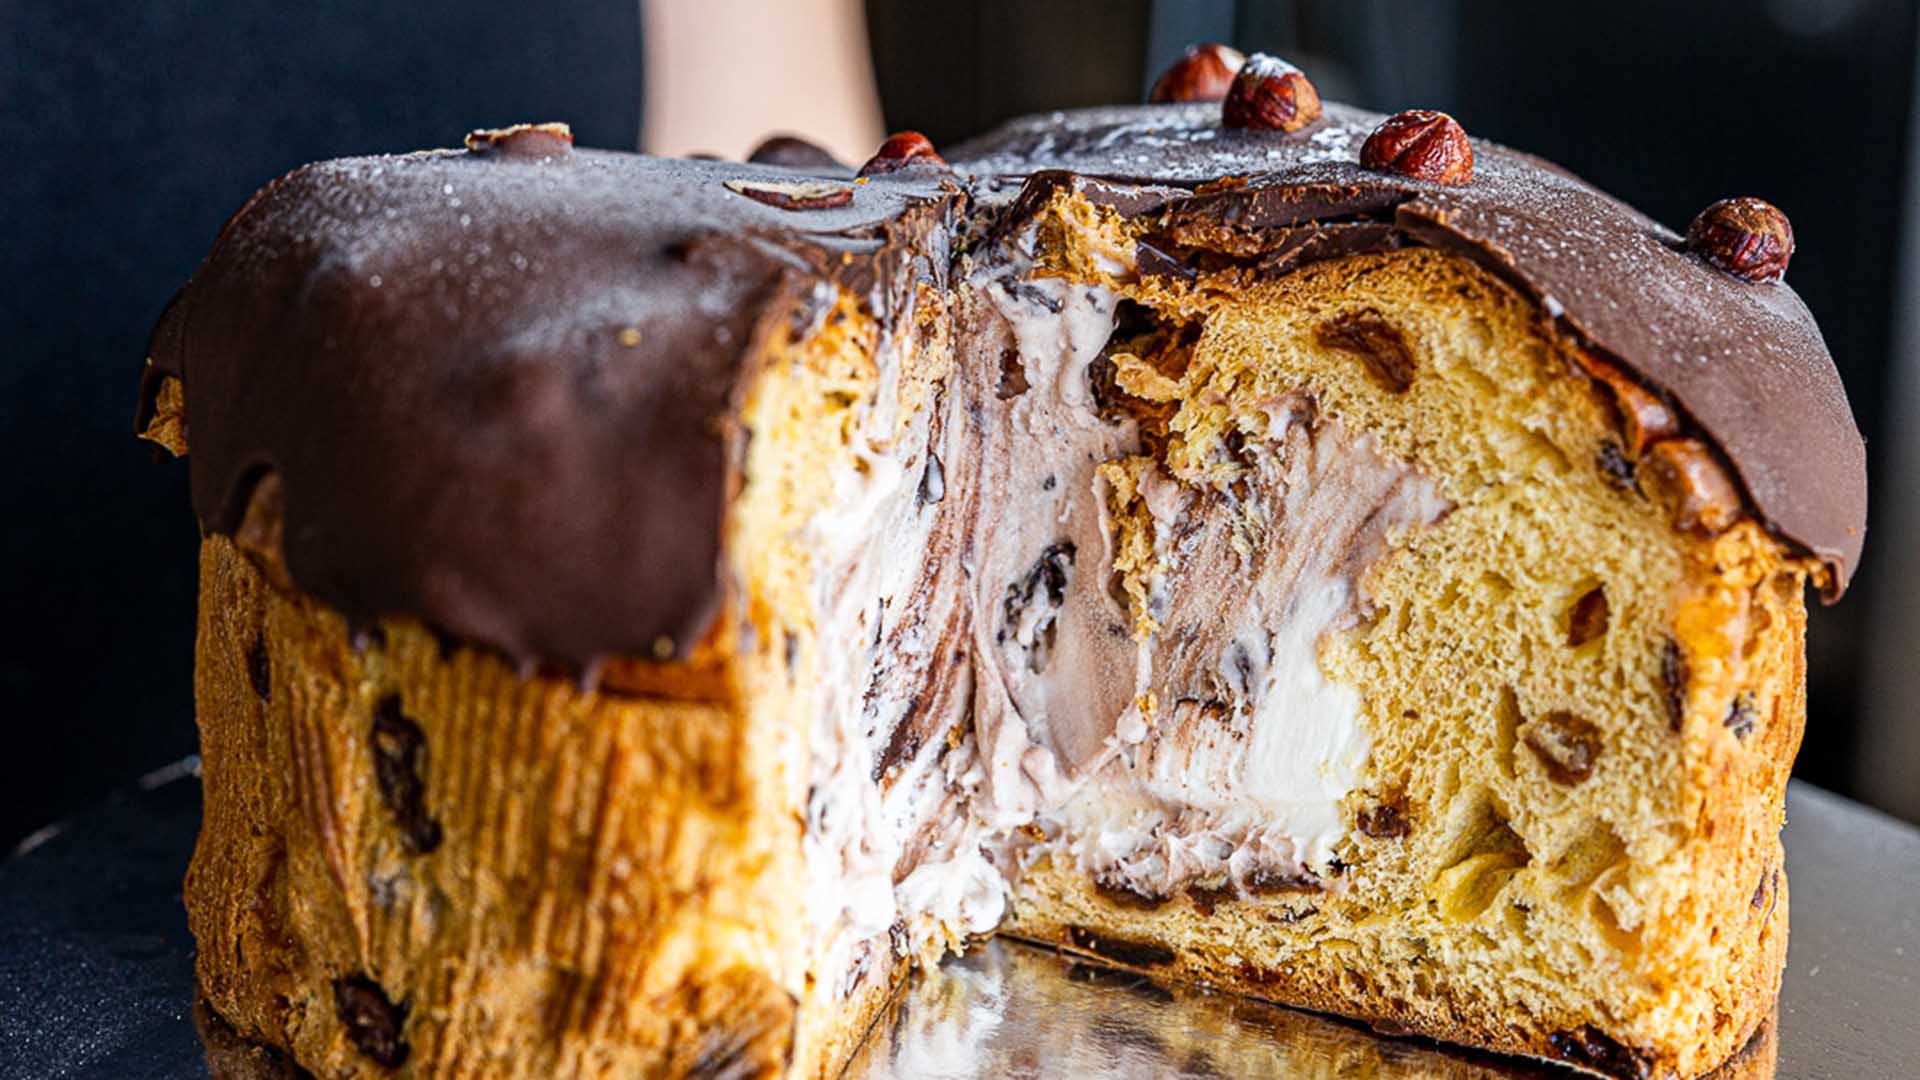 You Can Now Pick Up Gelato-Stuffed Panettone in Sydney So That's Your Christmas Dessert Sorted 